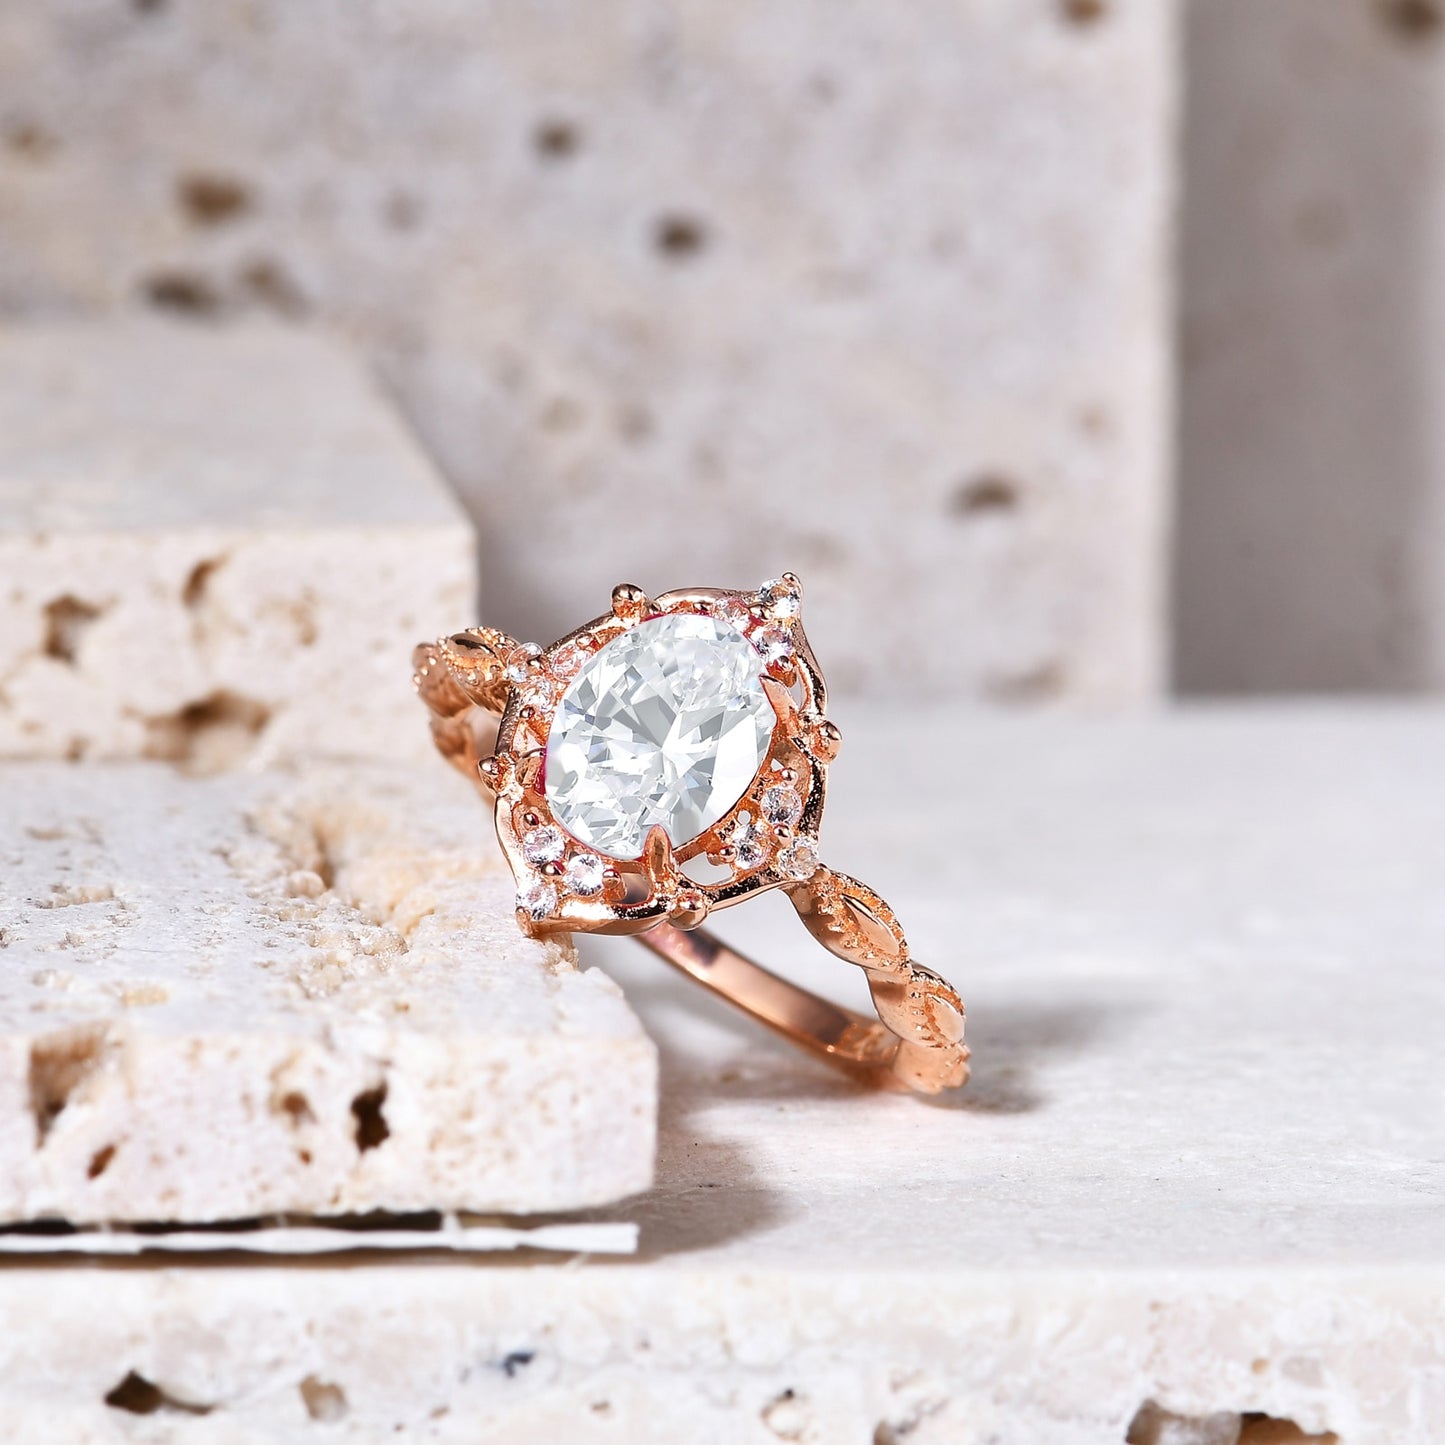 Solid rose gold vintage style halo engagement ring set with an oval cut moissanite.